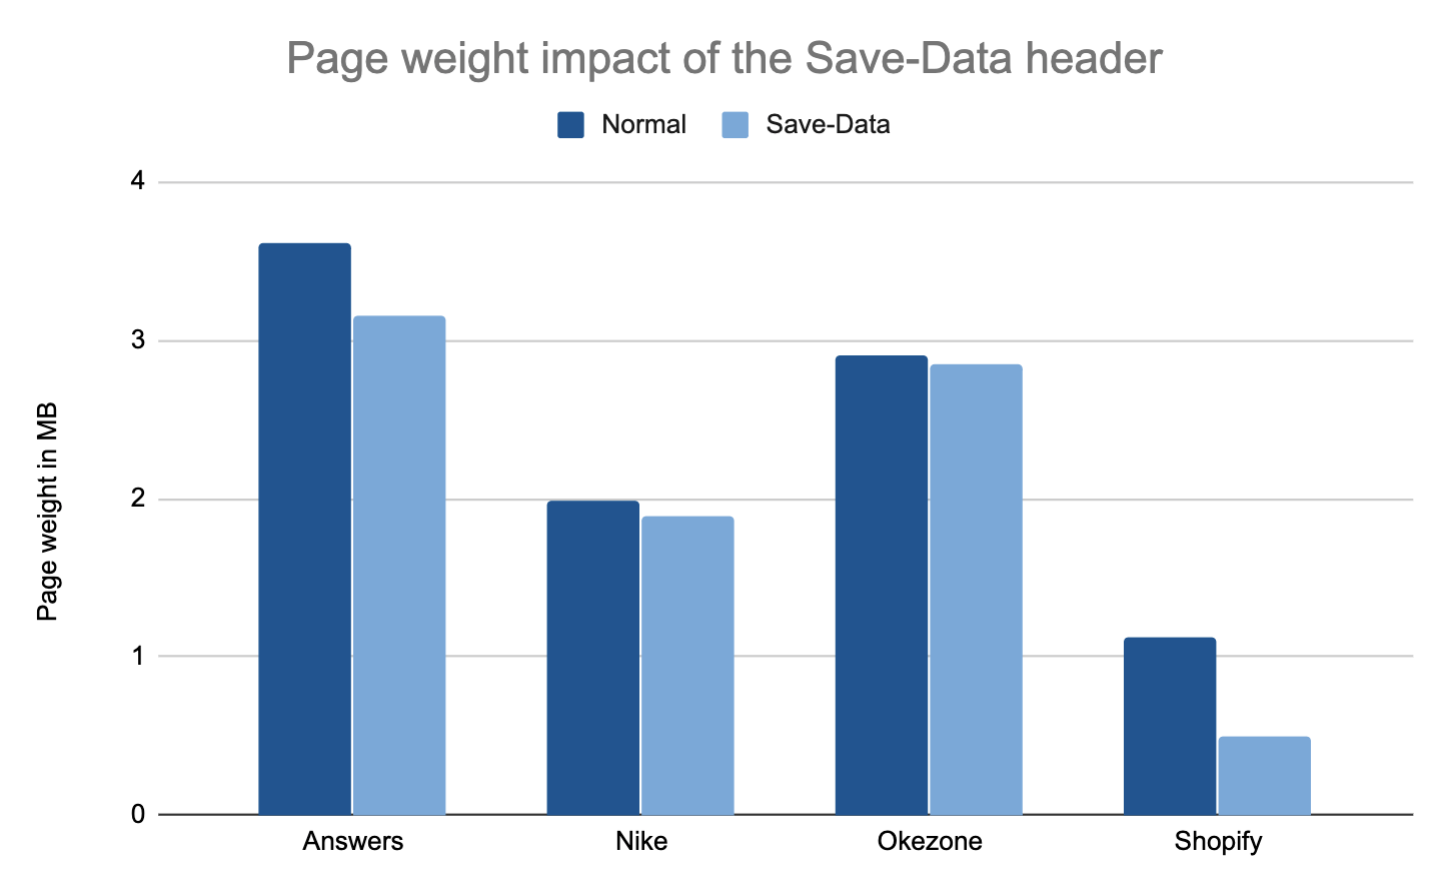 Page weight impact of Save-Data header